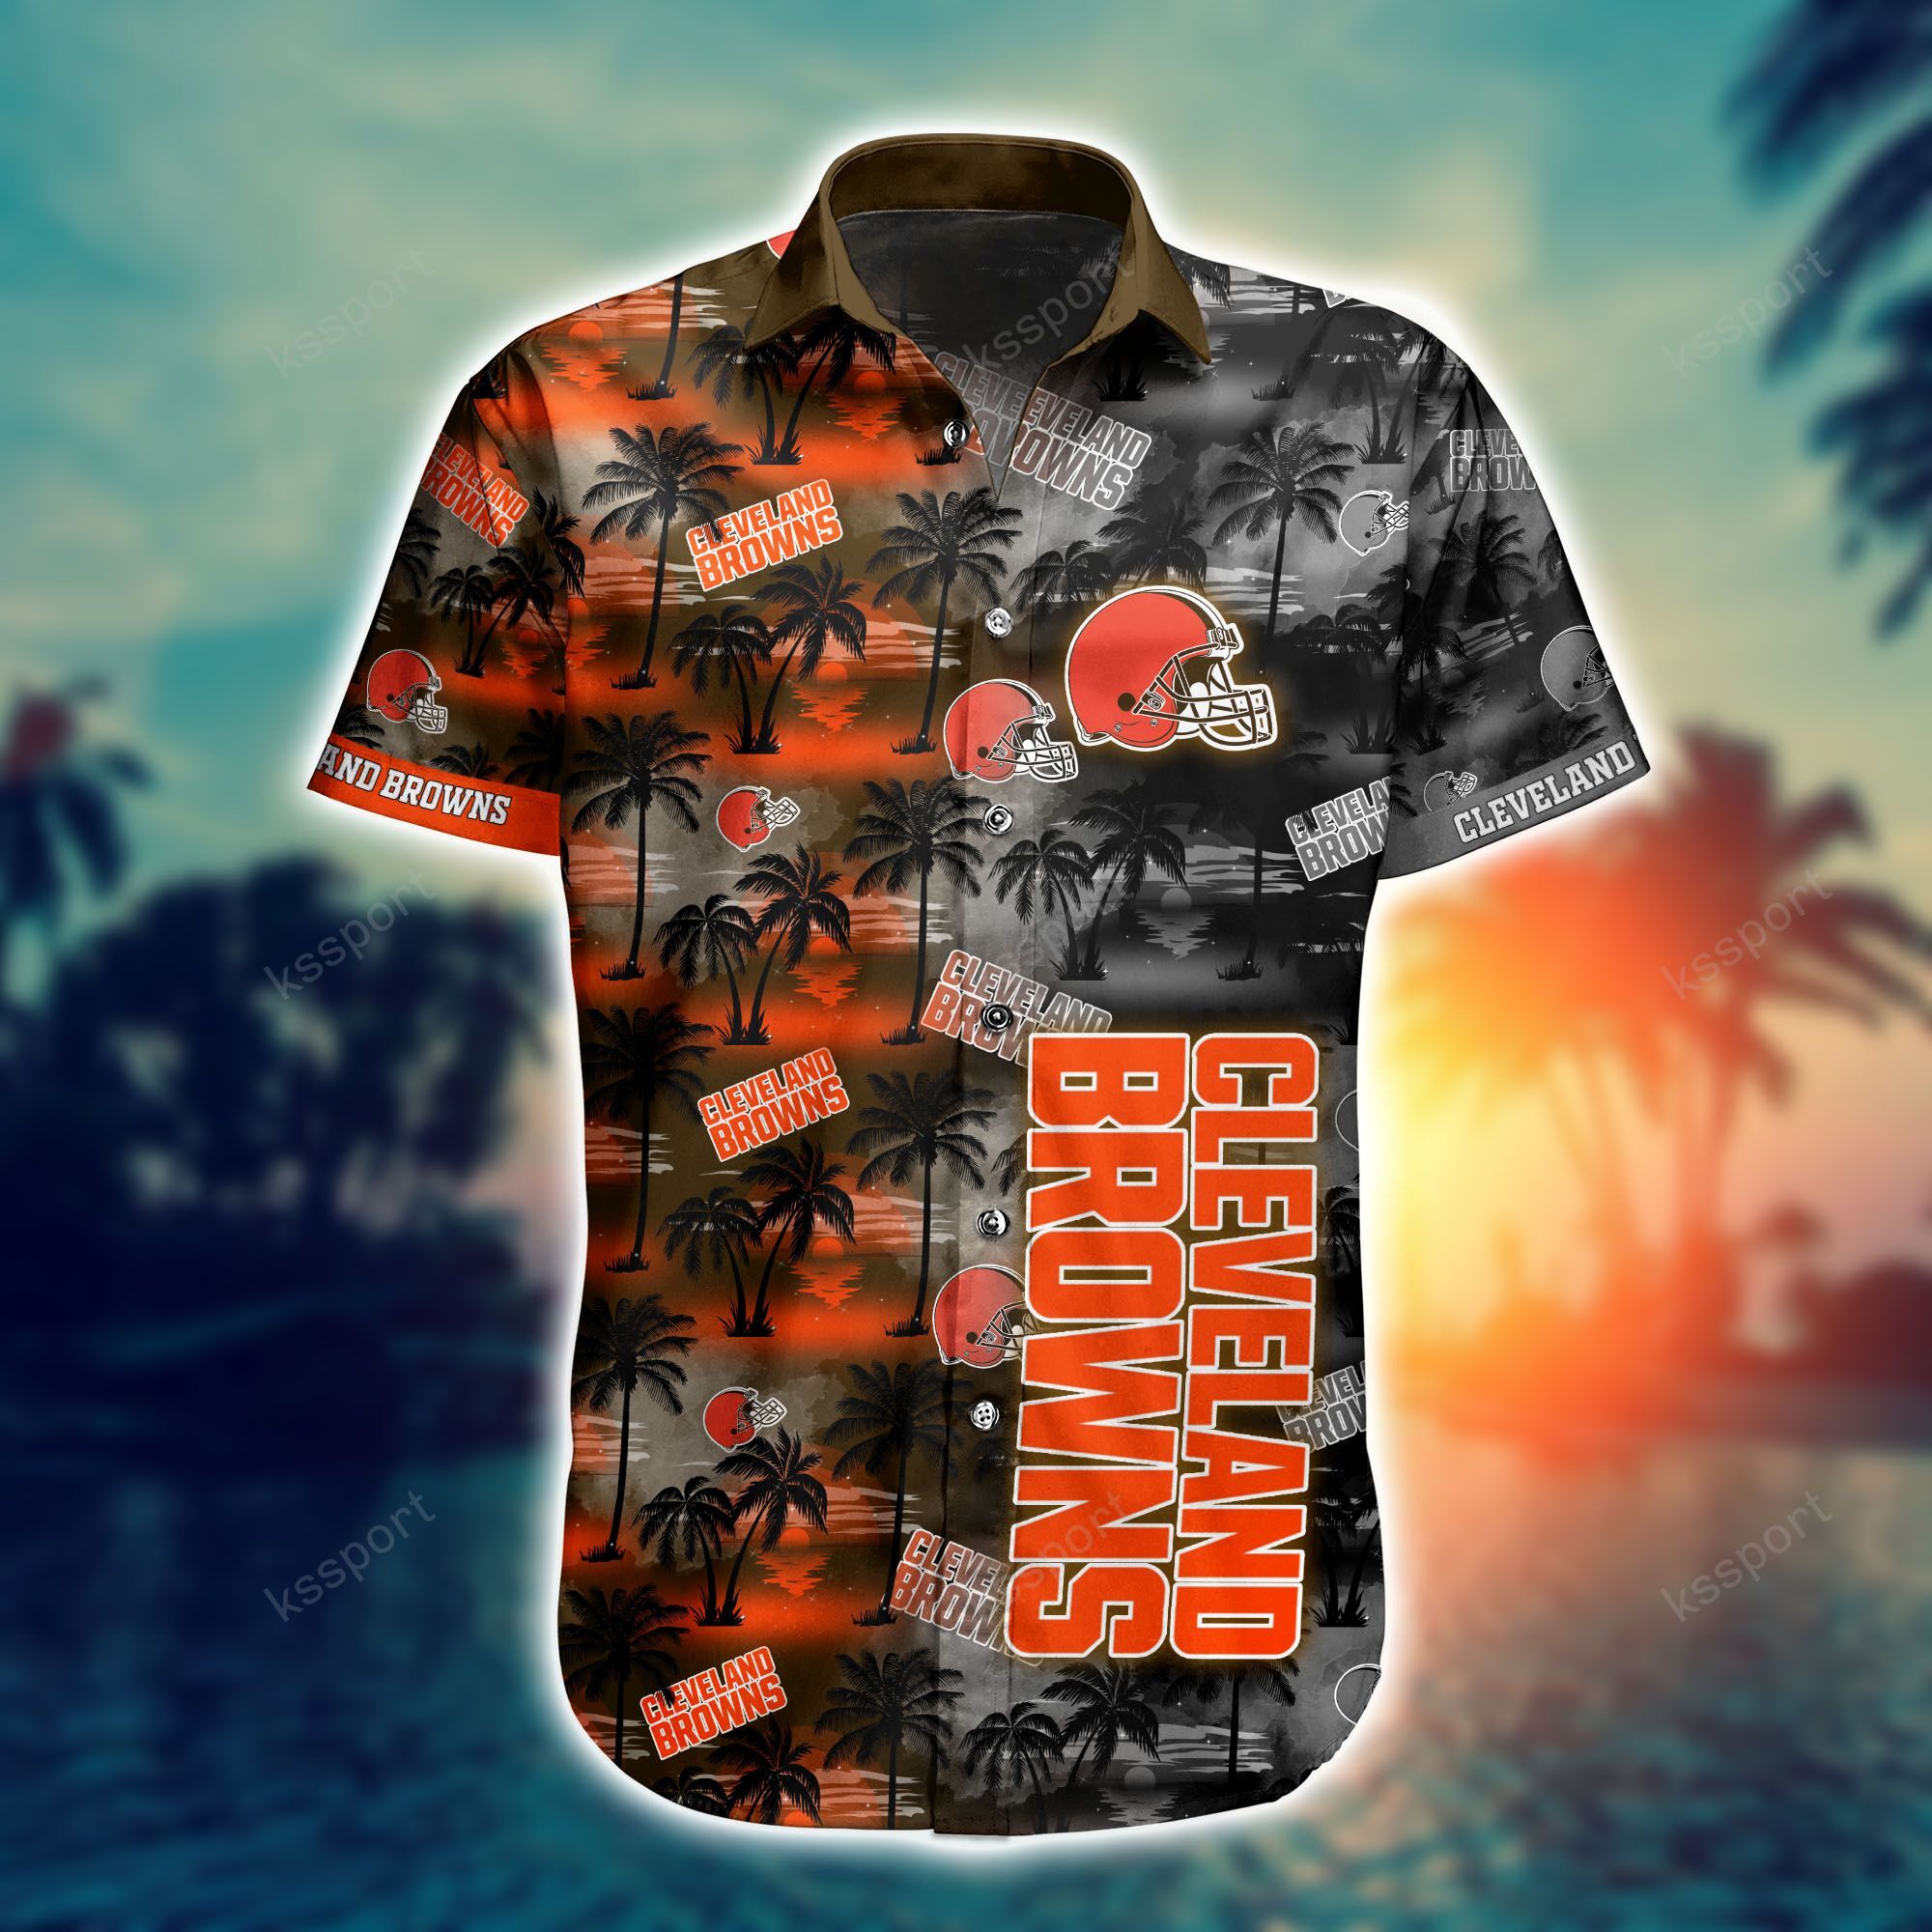 Top cool Hawaiian shirt 2022 - Make sure you get yours today before they run out! 212